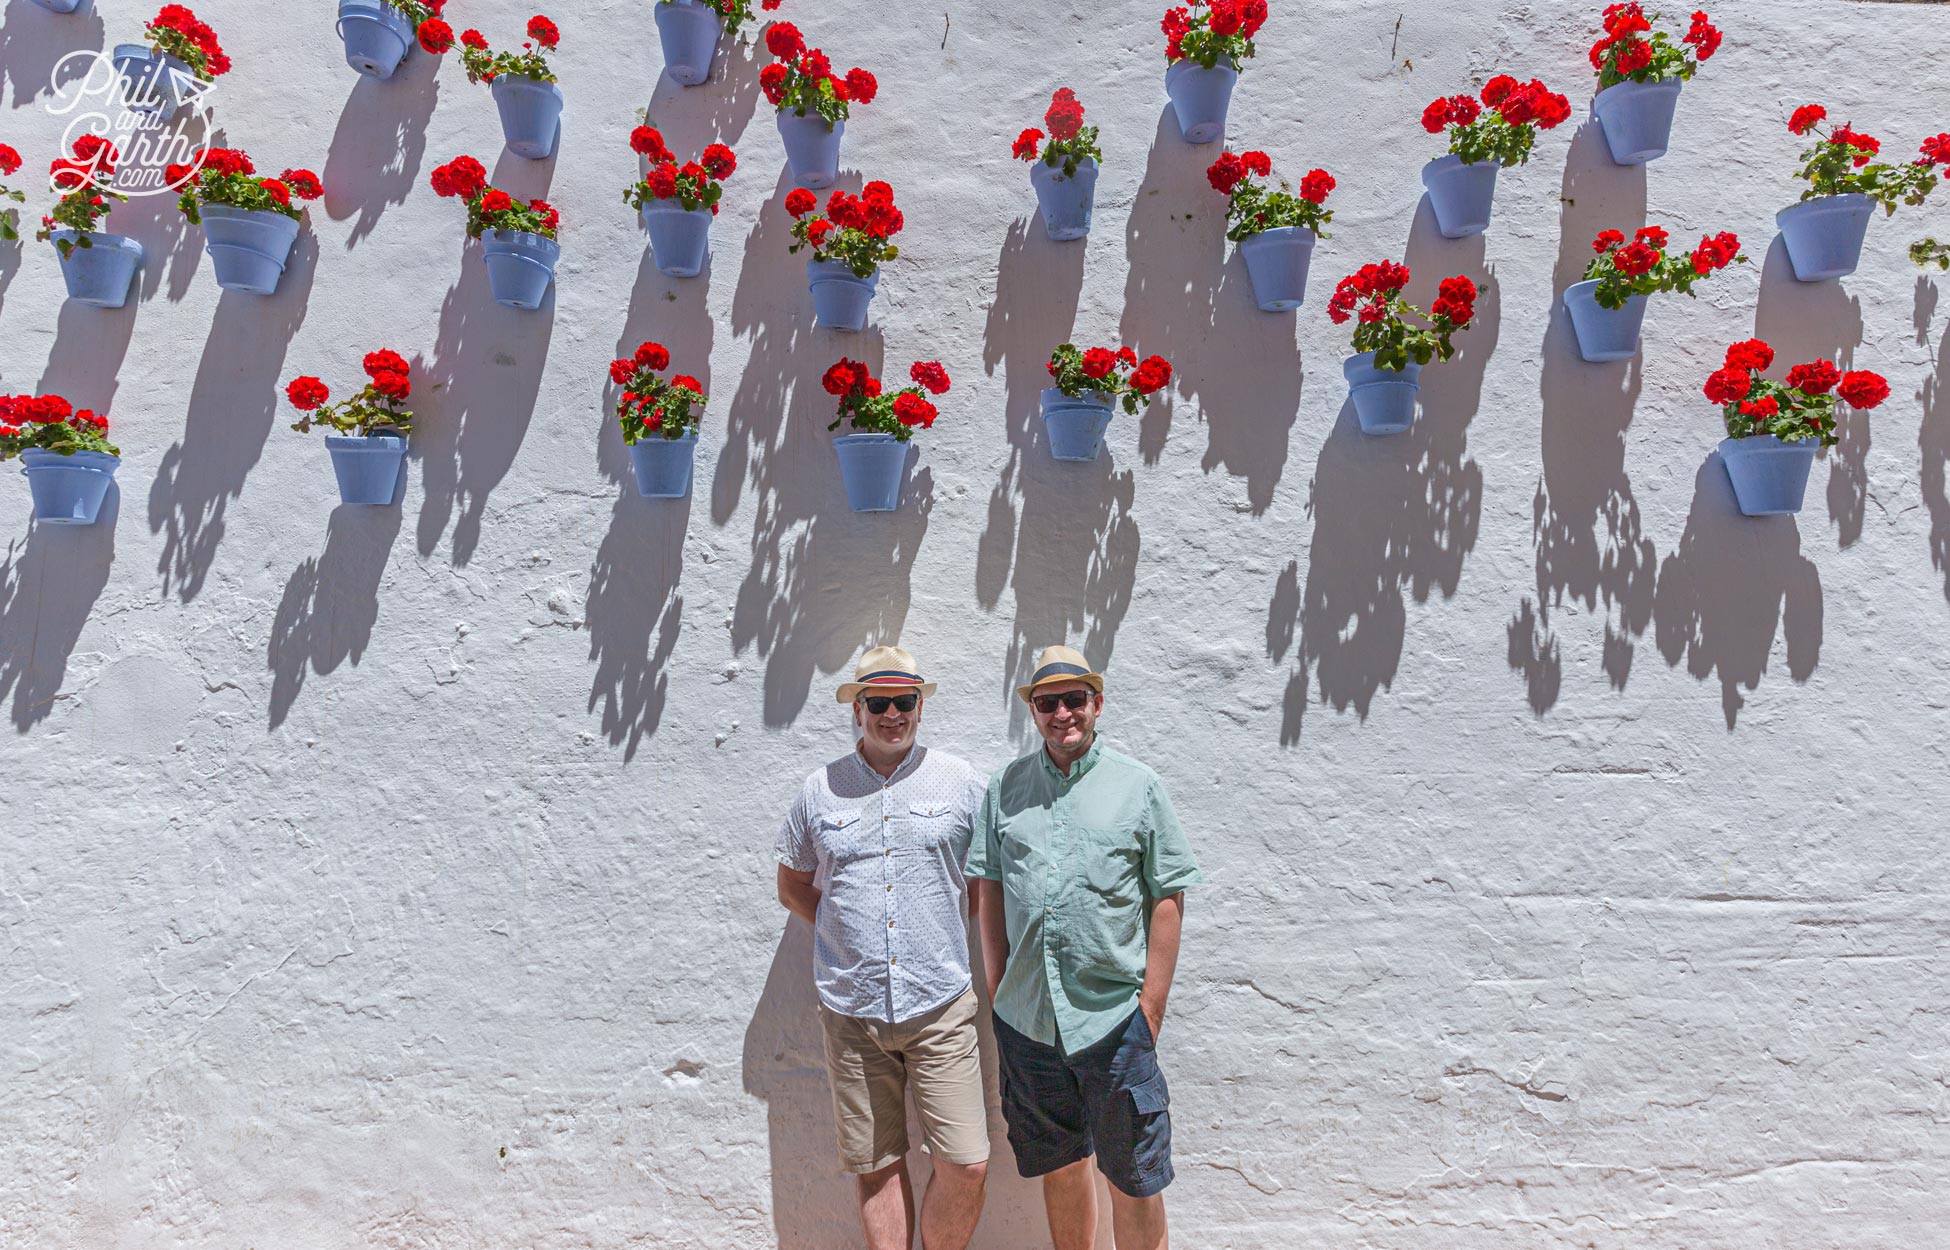 The flower pot walls in Marbella make a perfect Insta worthy photo